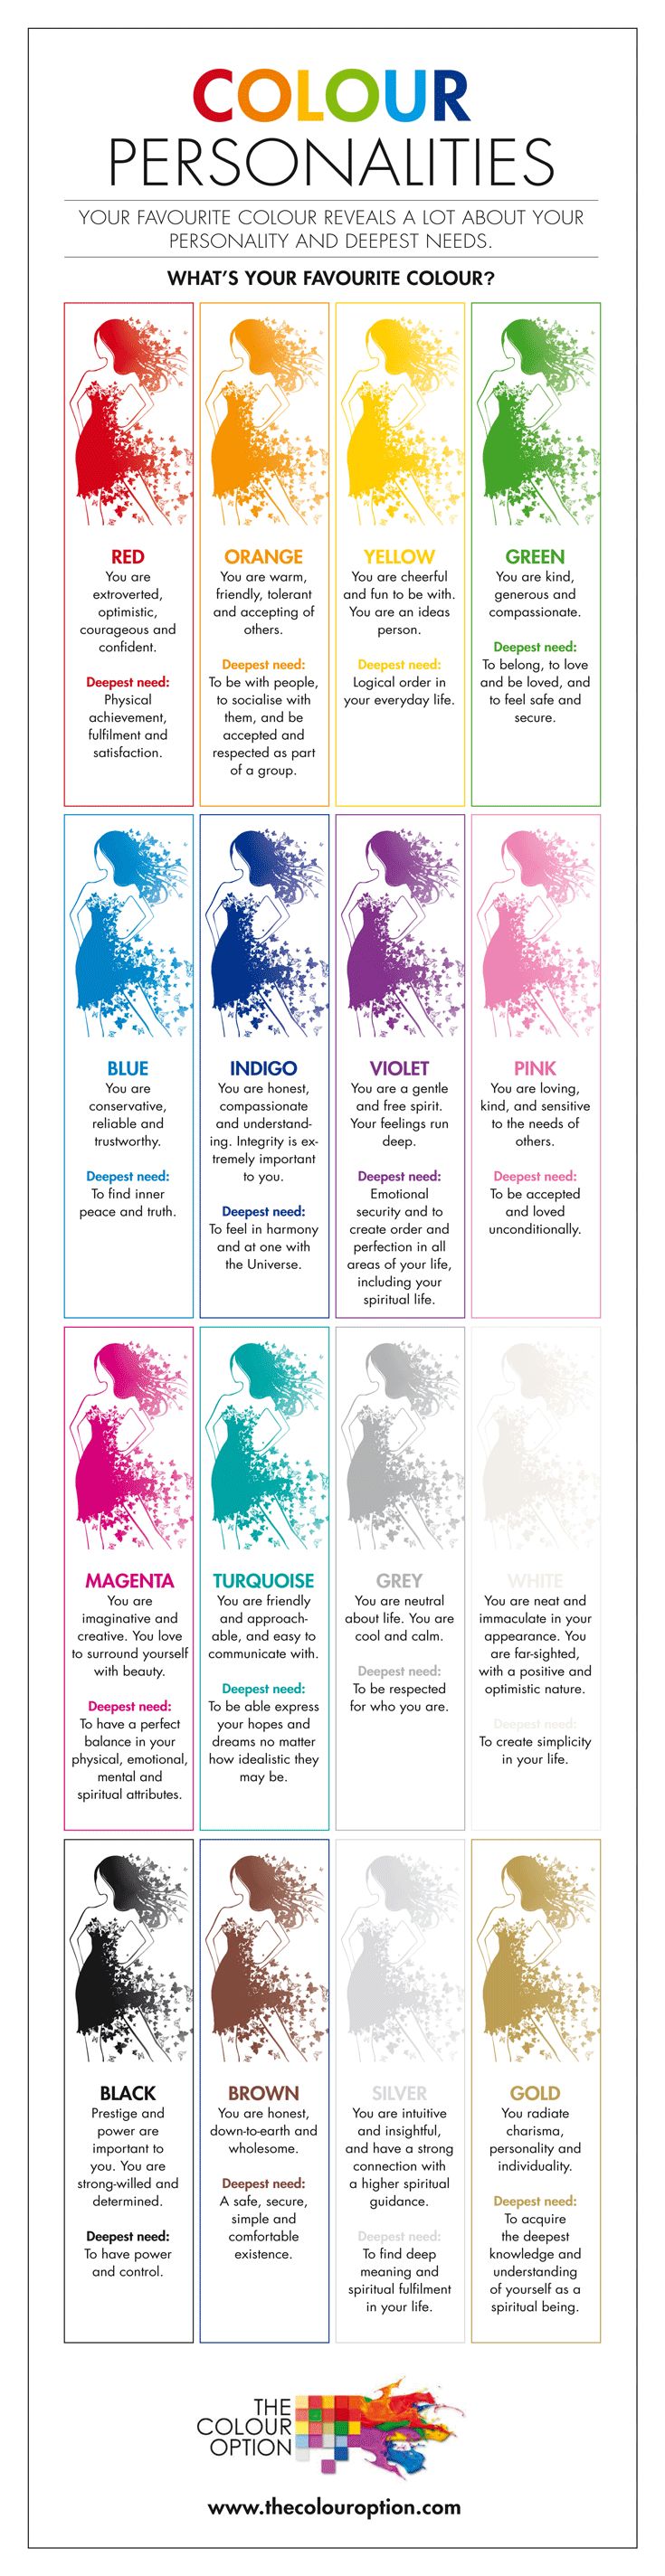 1530383460_884_Marketing-Infographic-Looking-for-a-color-personality-test-Name-your-favorite-color-and-in-seconds-y Infographic : Favorite Color Personality Test: Is It True About You?